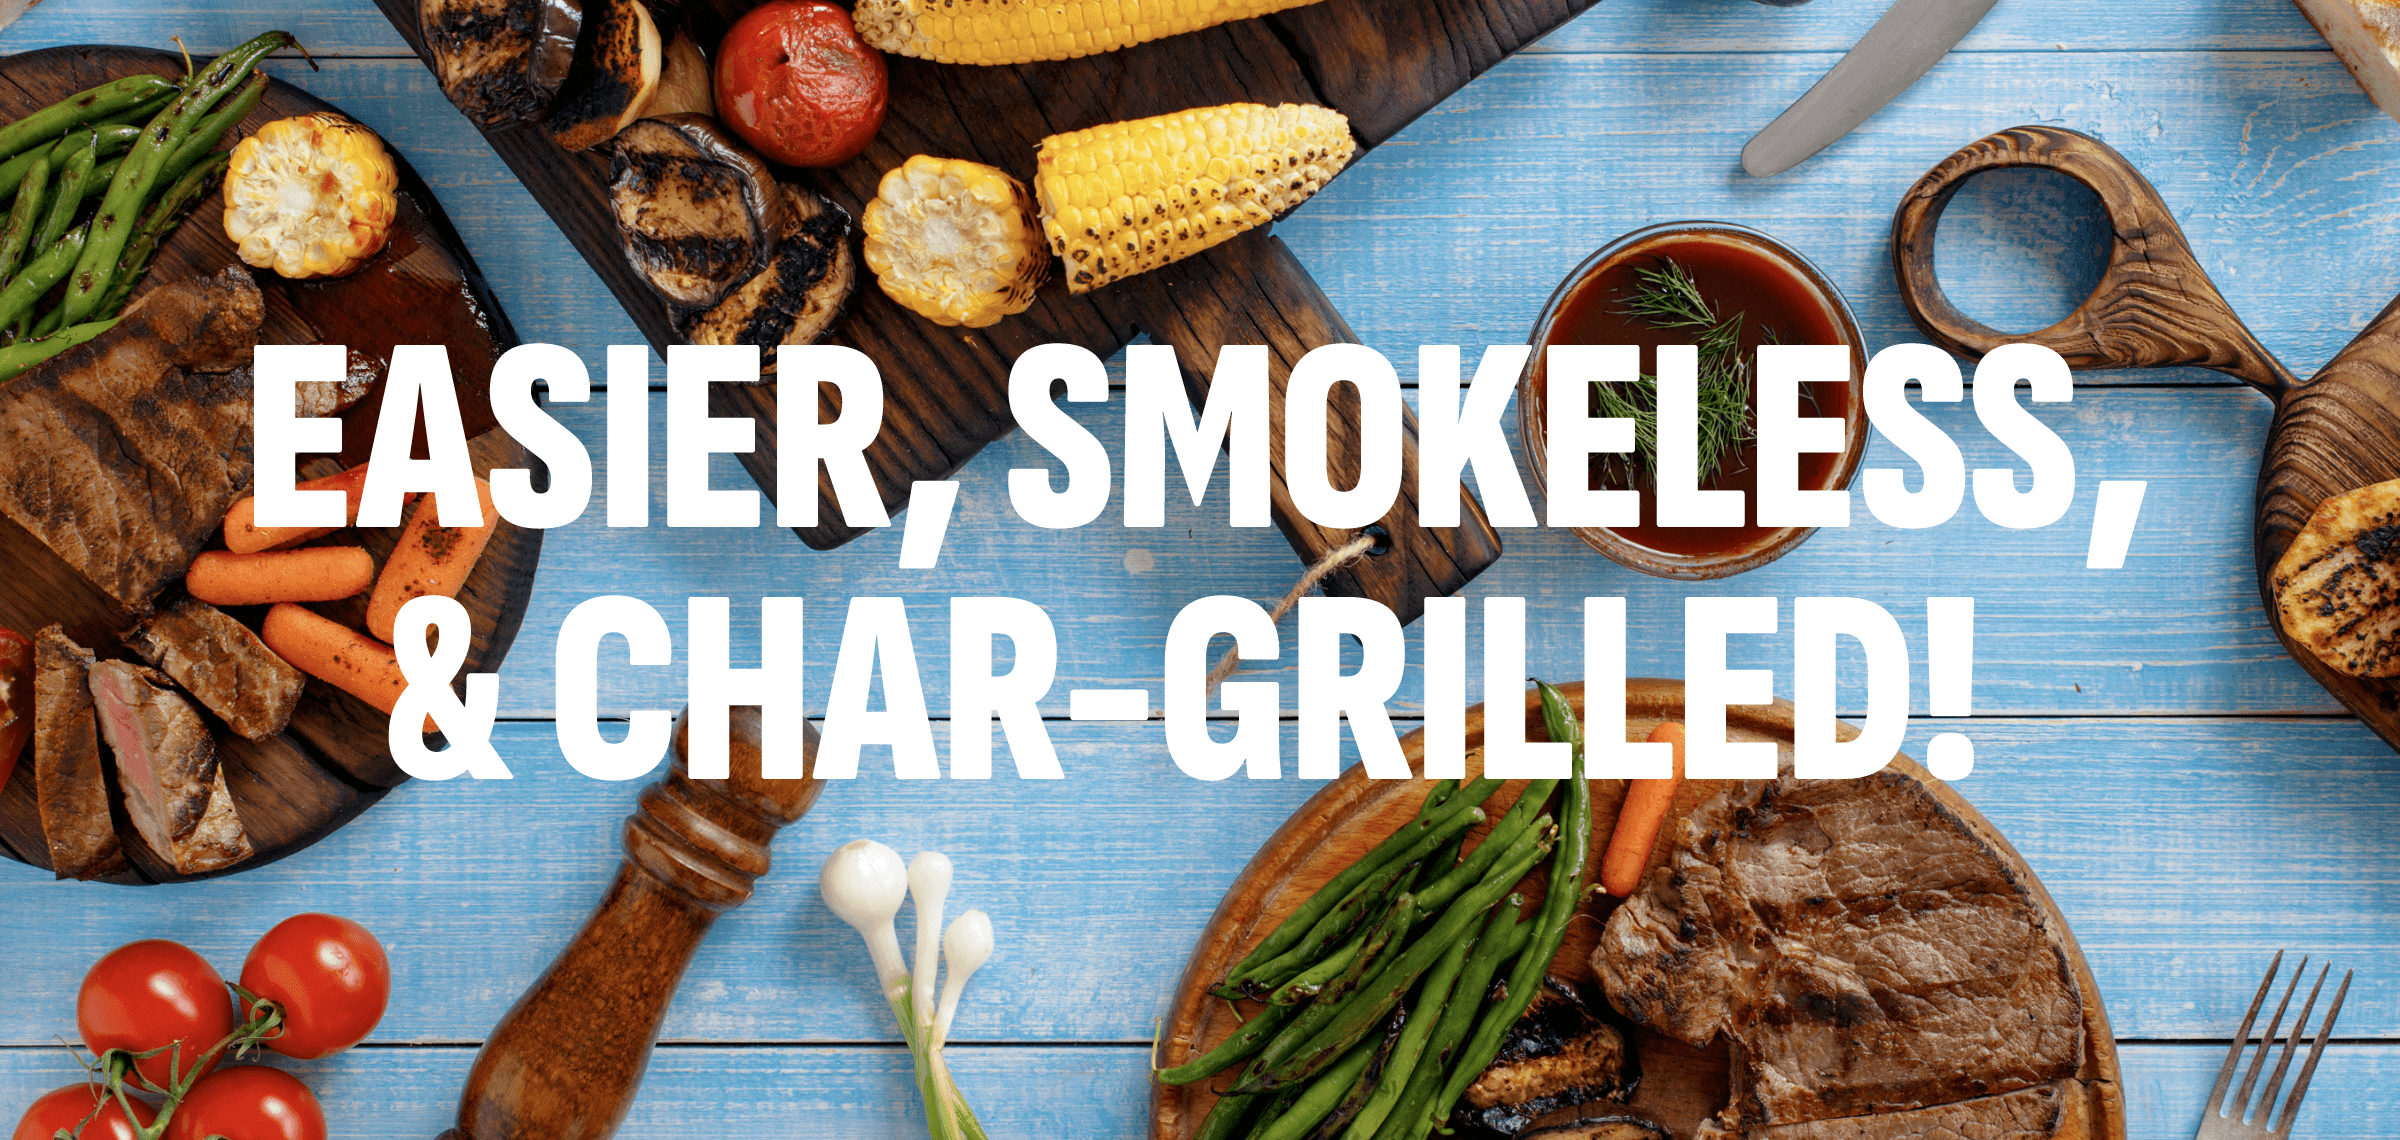 Easier, Smokeless, & Char-Grilled!